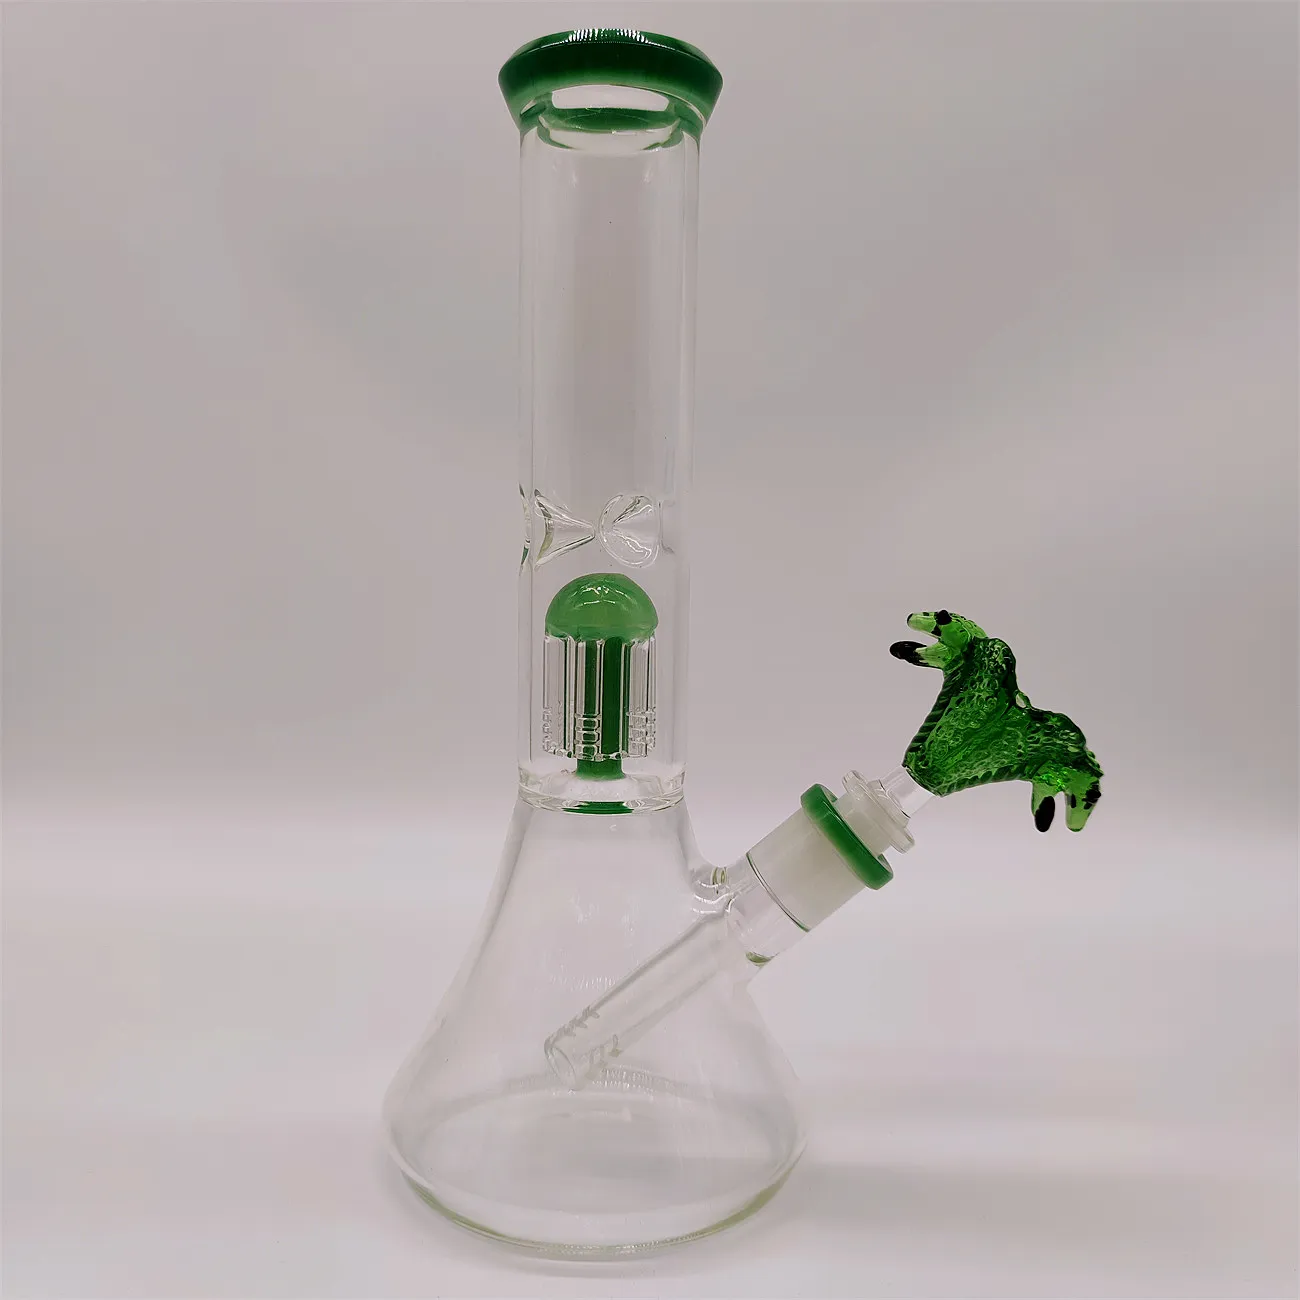 2021 glass water pipe Heady Bong 12 Inches Cream Green Hookah Glass Bong Dabber Rig Recycler Pipes Water Bongs Smoke Pipe 14.4mm Female Snake Head Joint Bowl